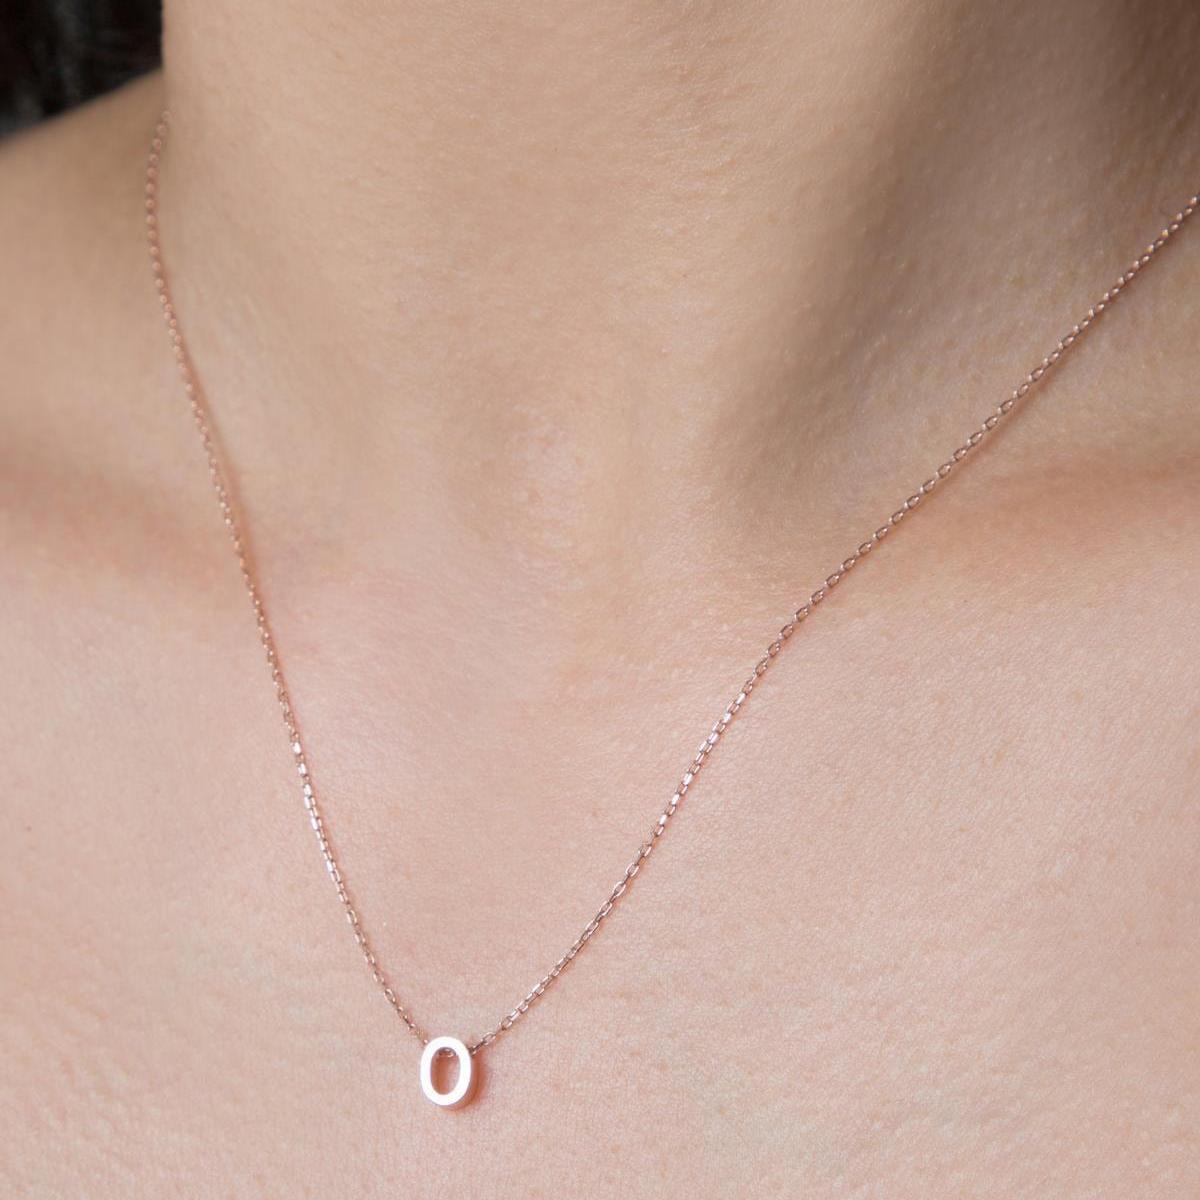 O Initial Necklace Rose • Rose Gold Initial Necklace • Gift For Her - Trending Silver Gifts